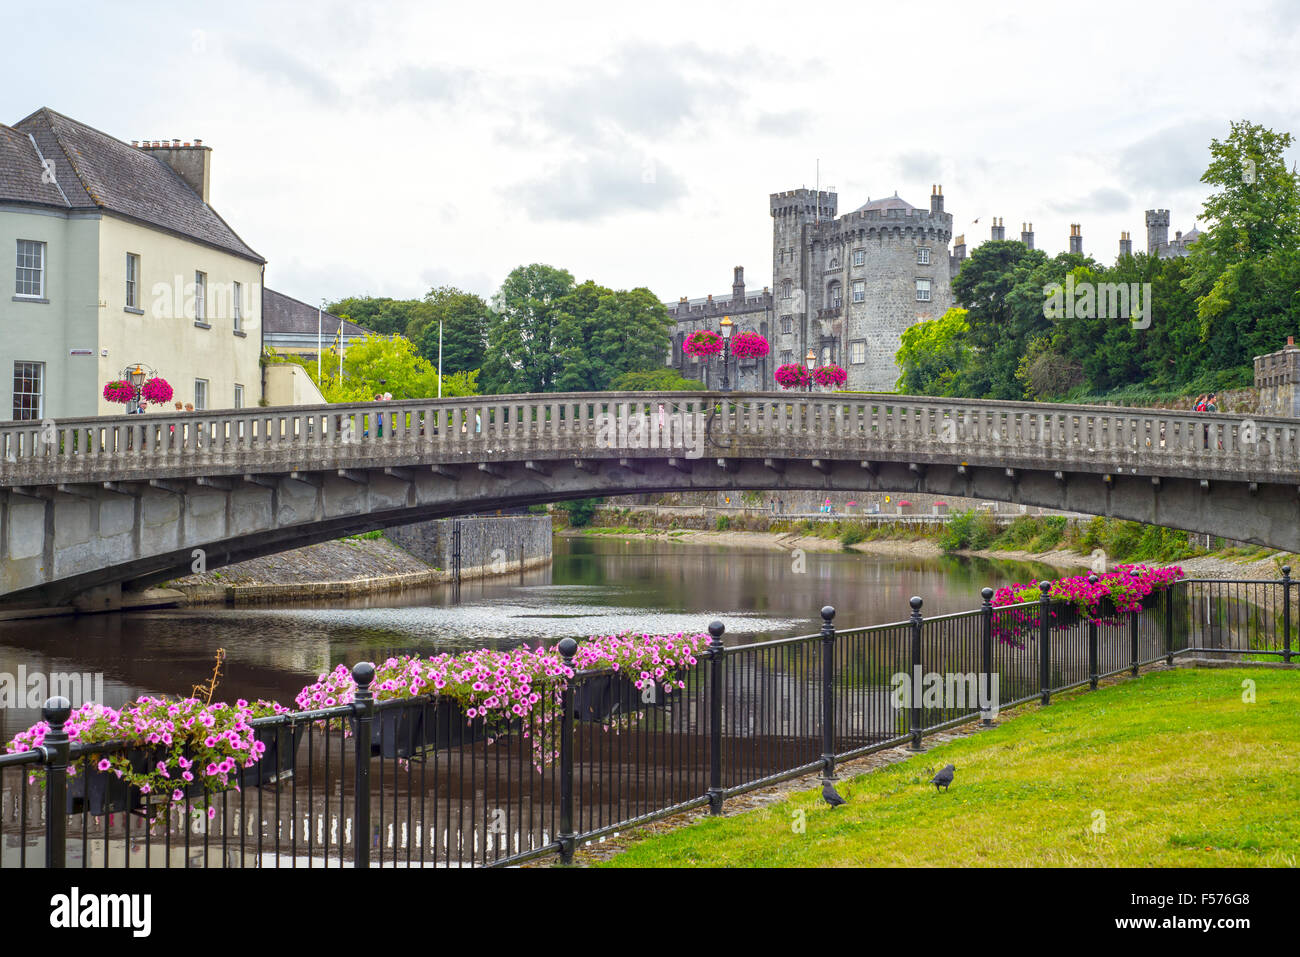 beautiful flower lined riverside railings view of kilkenny castle town and bridge Stock Photo